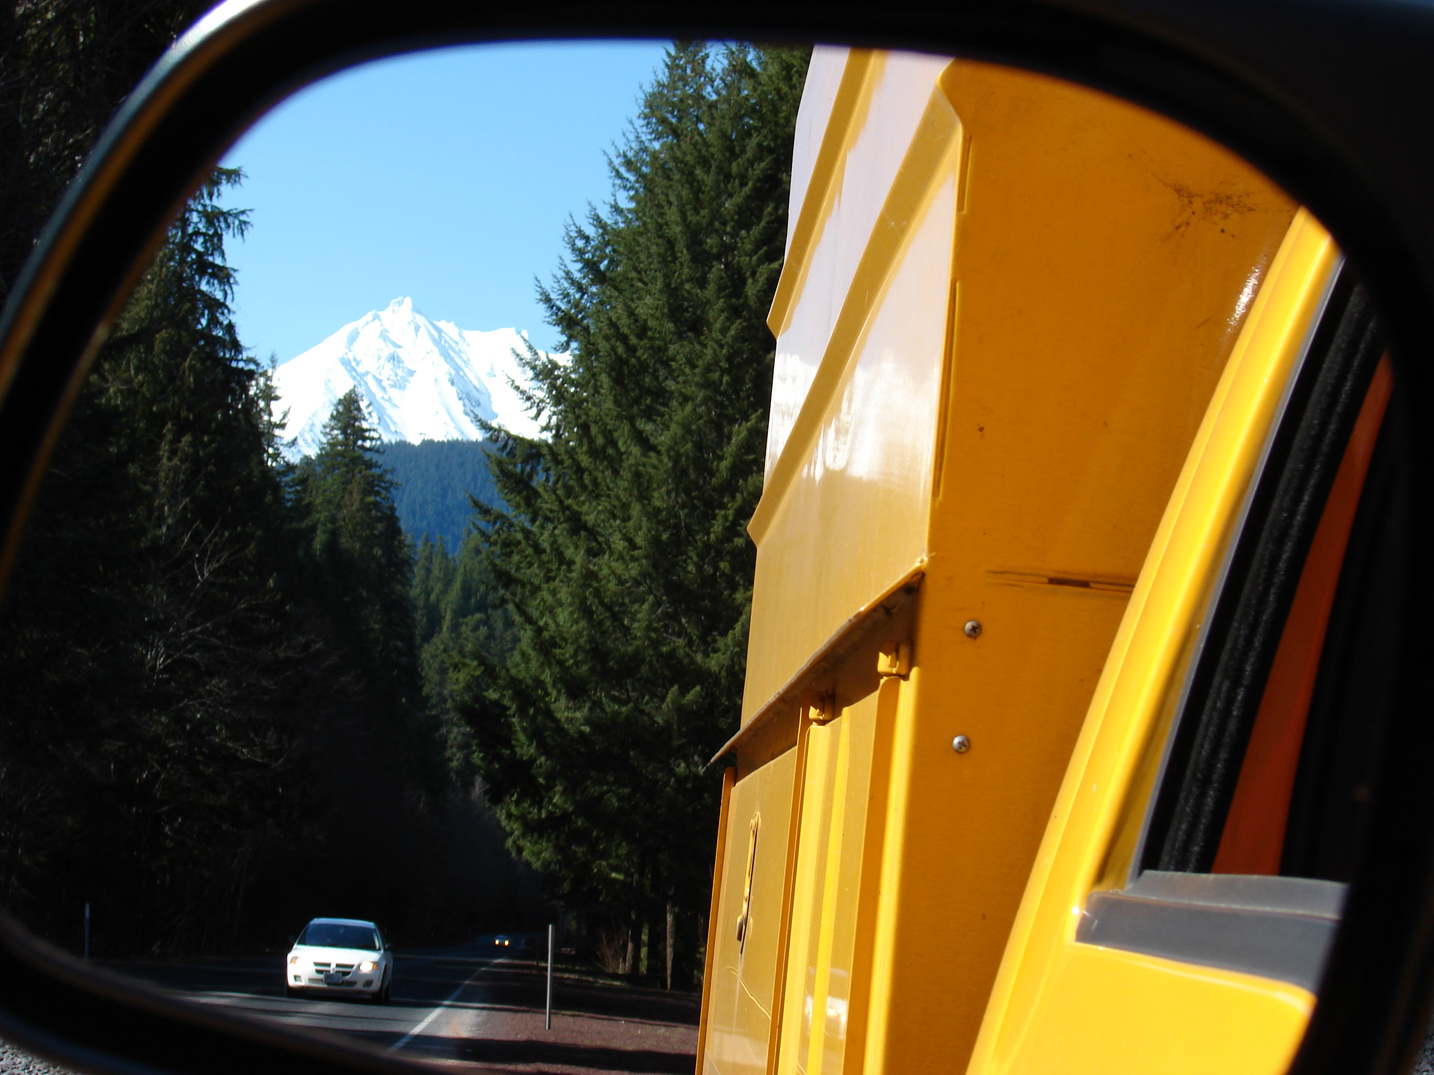 Mt. Jefferson reflected in a truck's mirror